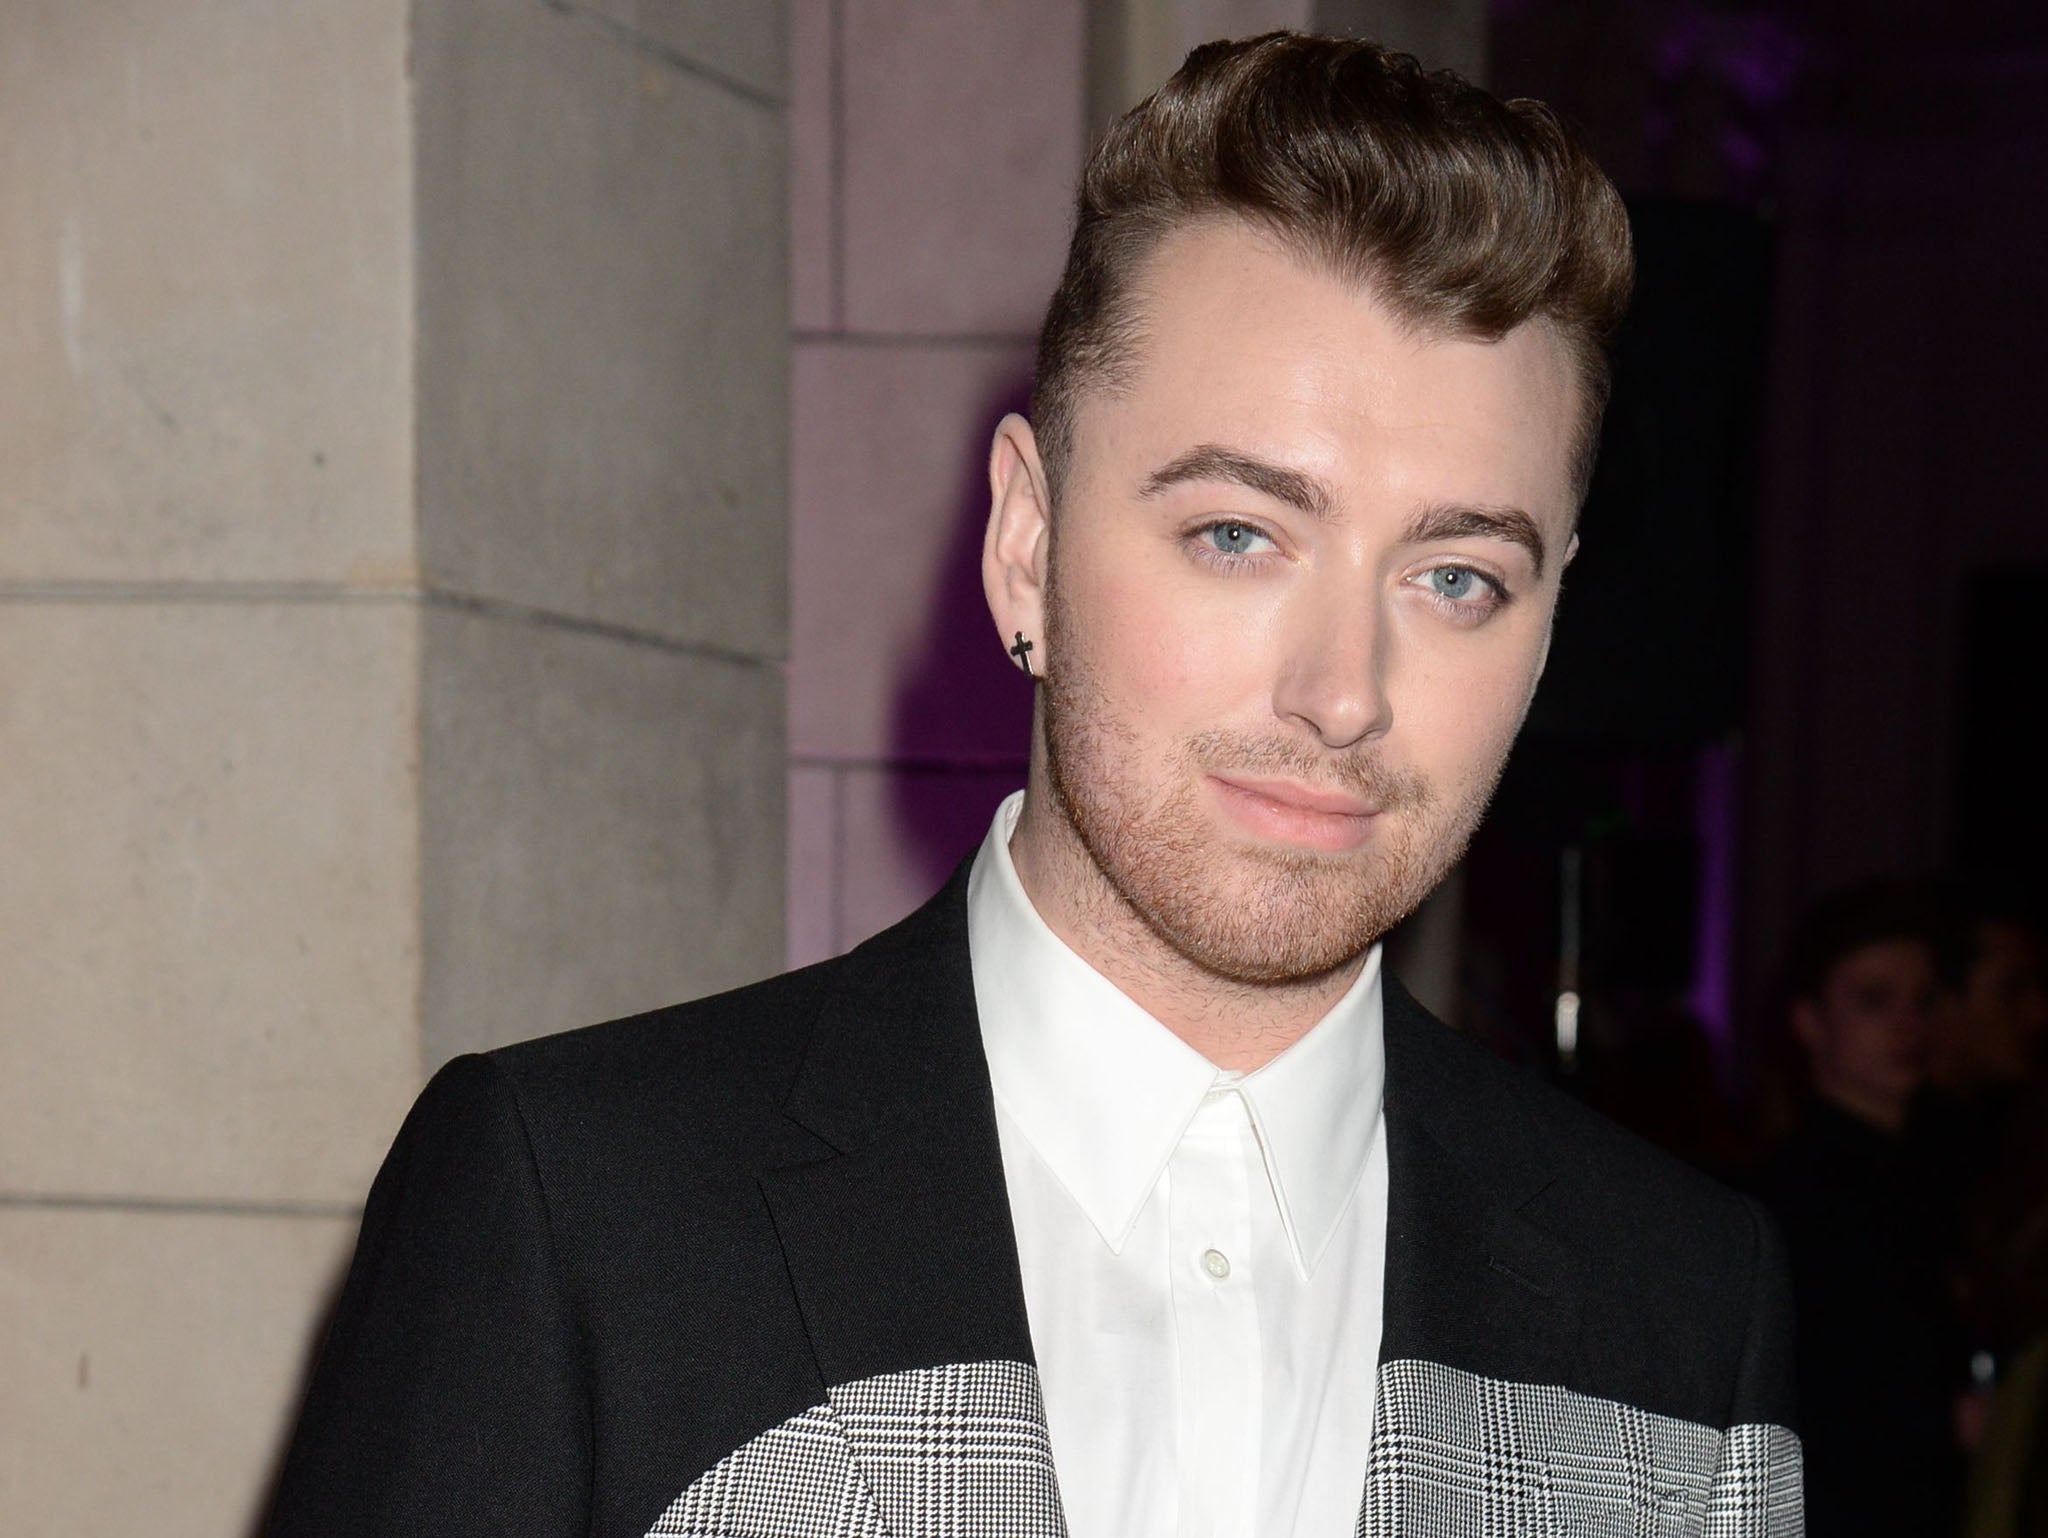 Sam Smith will be singing the new James Bond theme